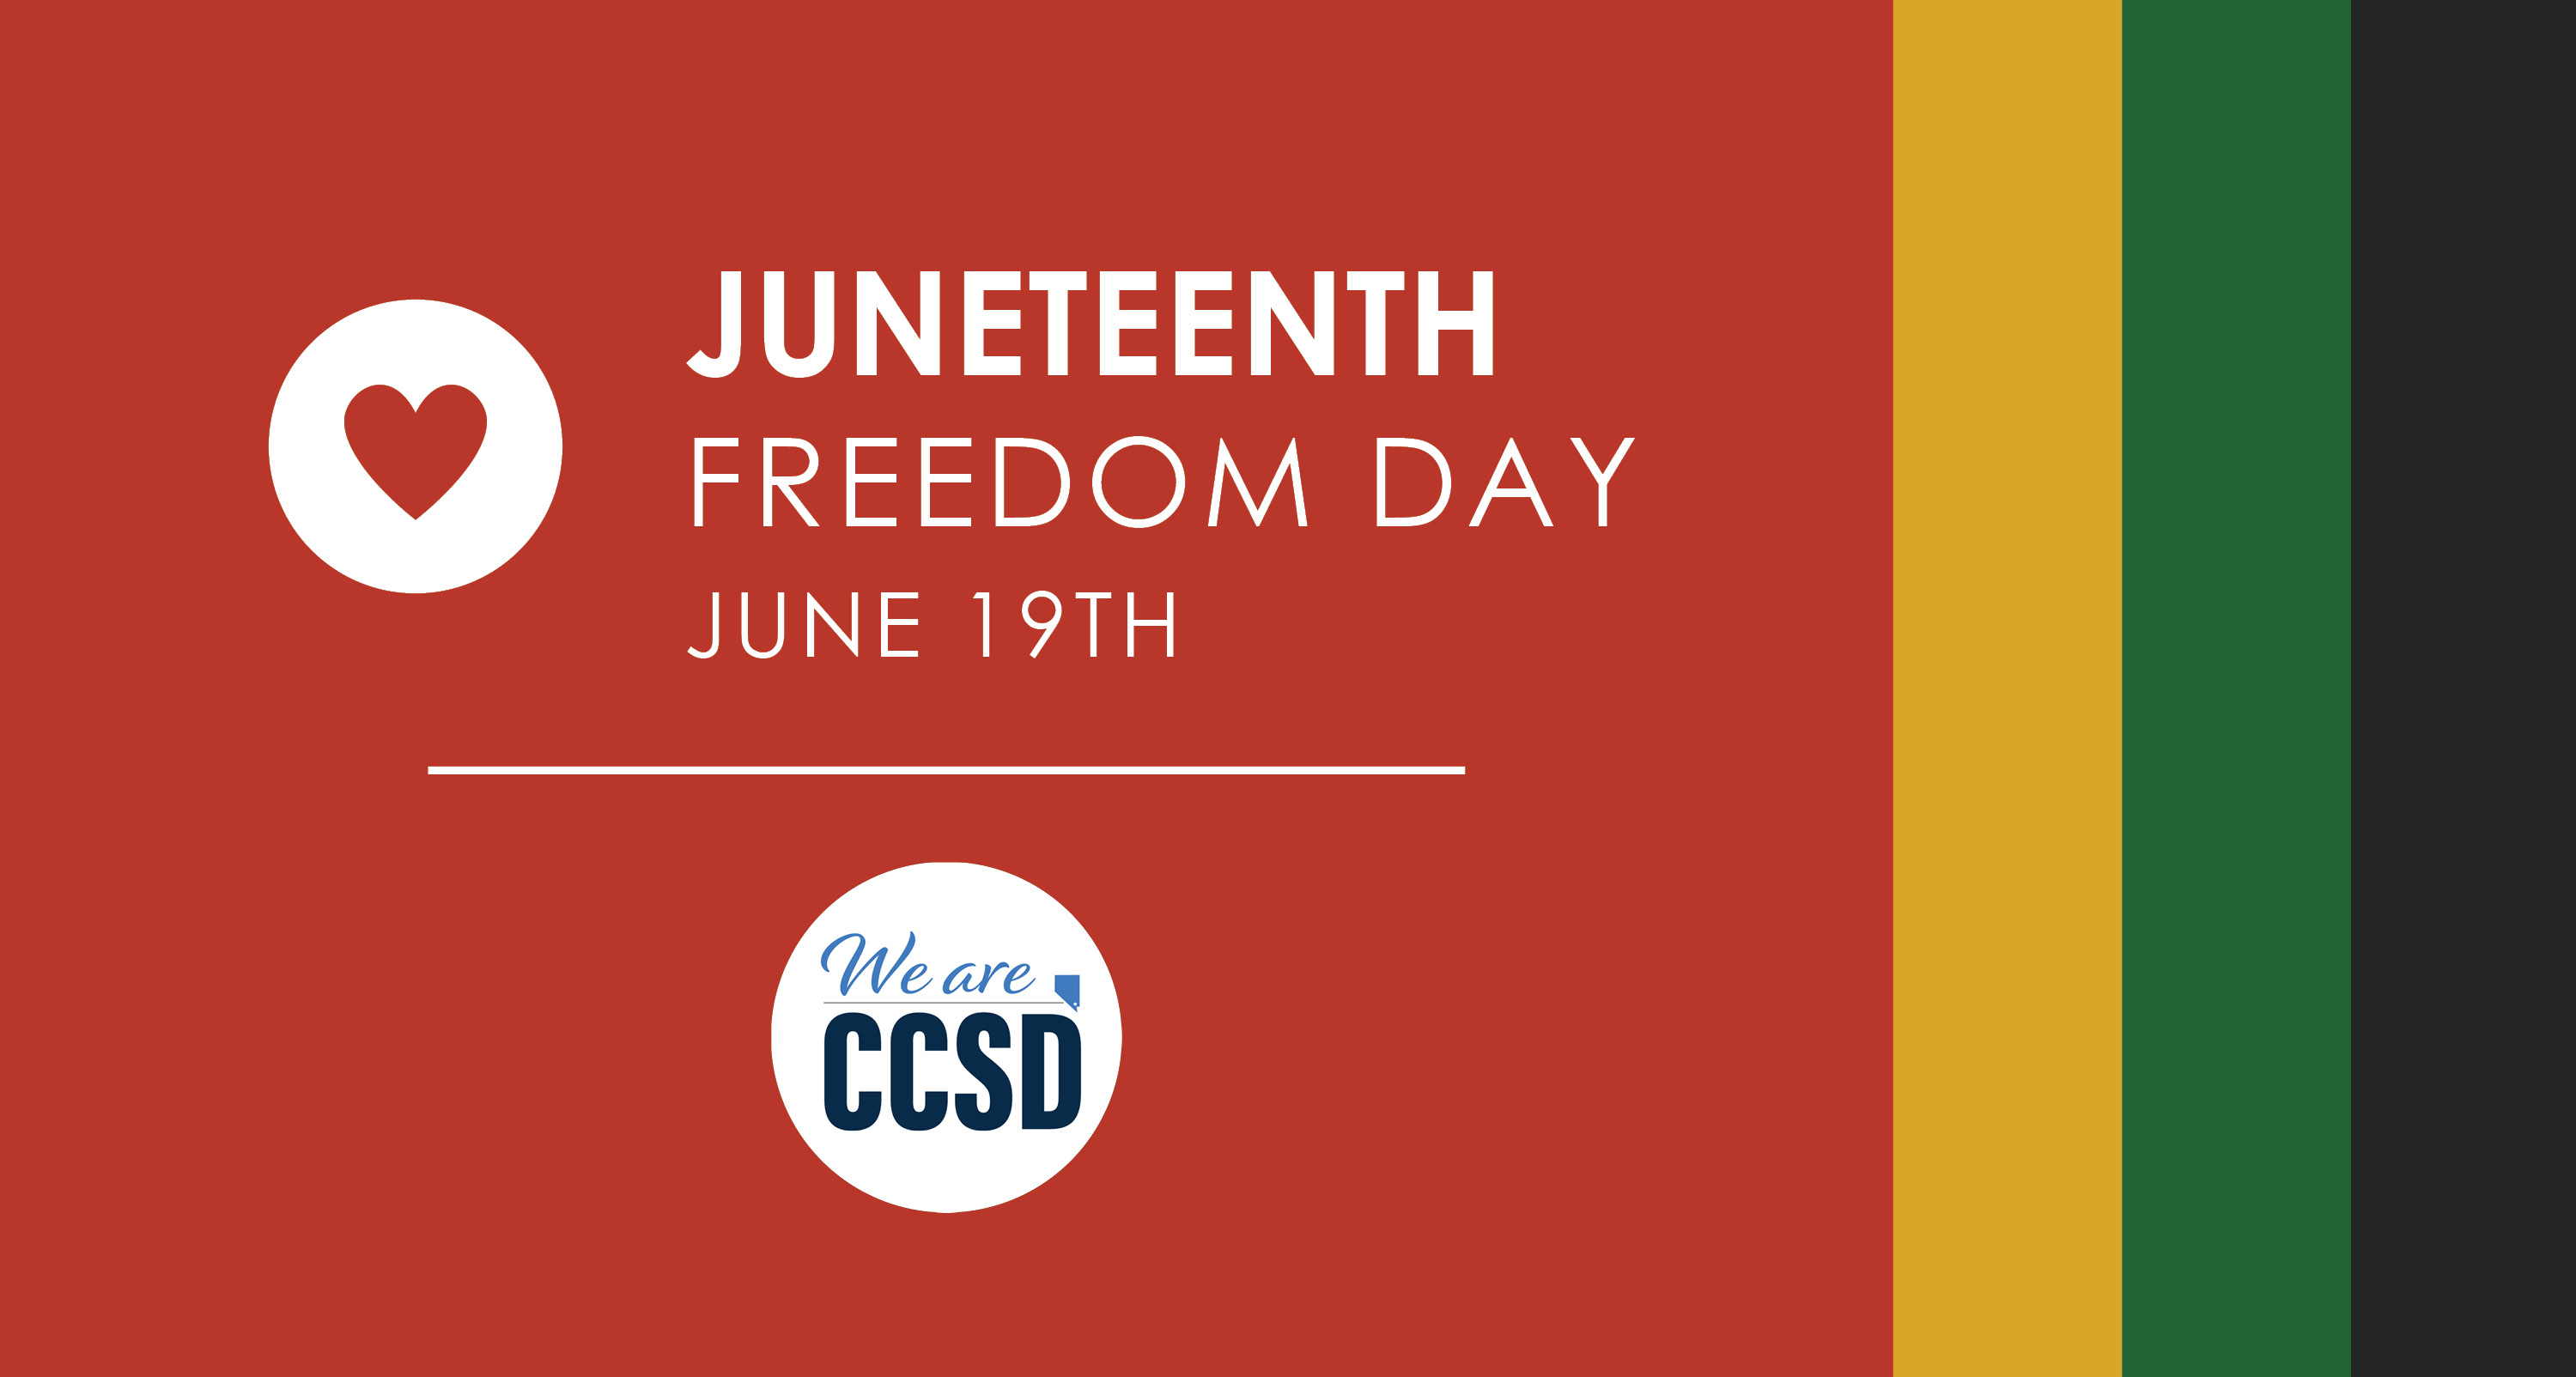 CCSD offices closed June 19 for Juneteenth